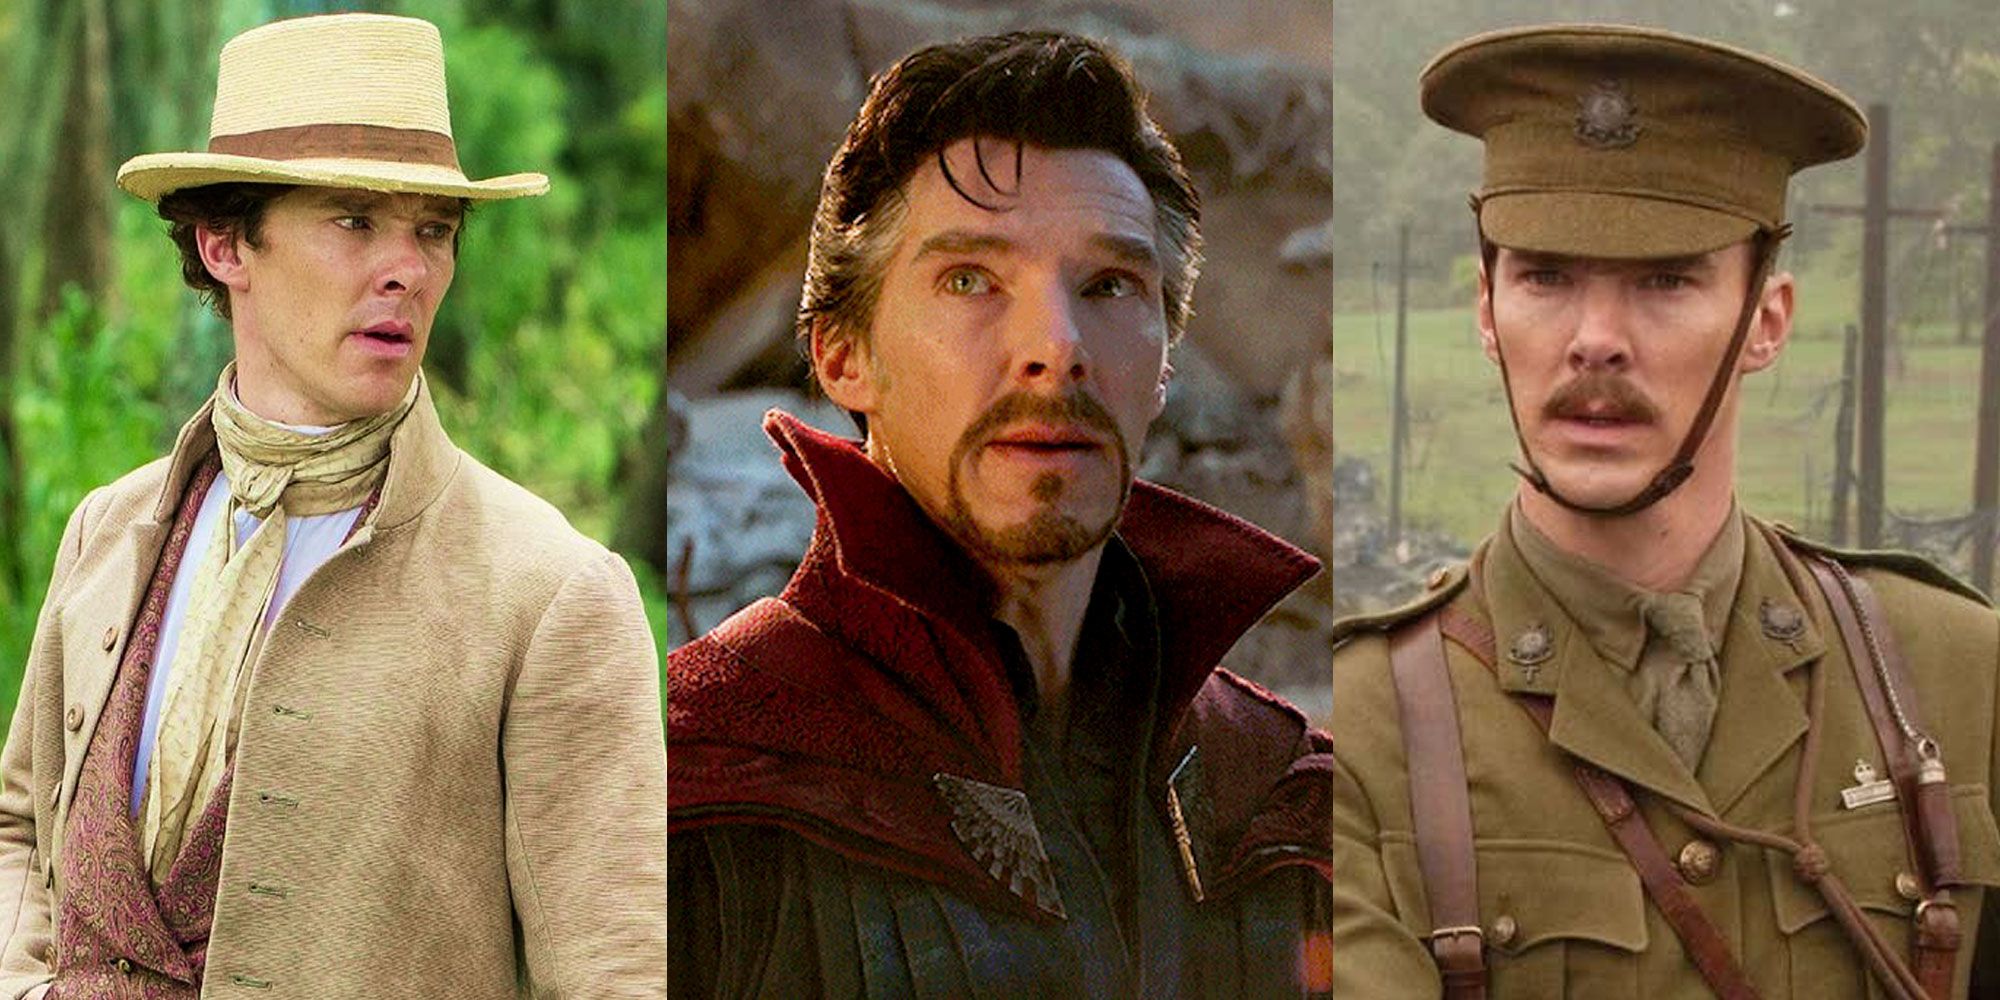 A split image features Benedict Cumberbatch playing characters in 12 Years A Slave, Avengers: Infinity War, and 1917